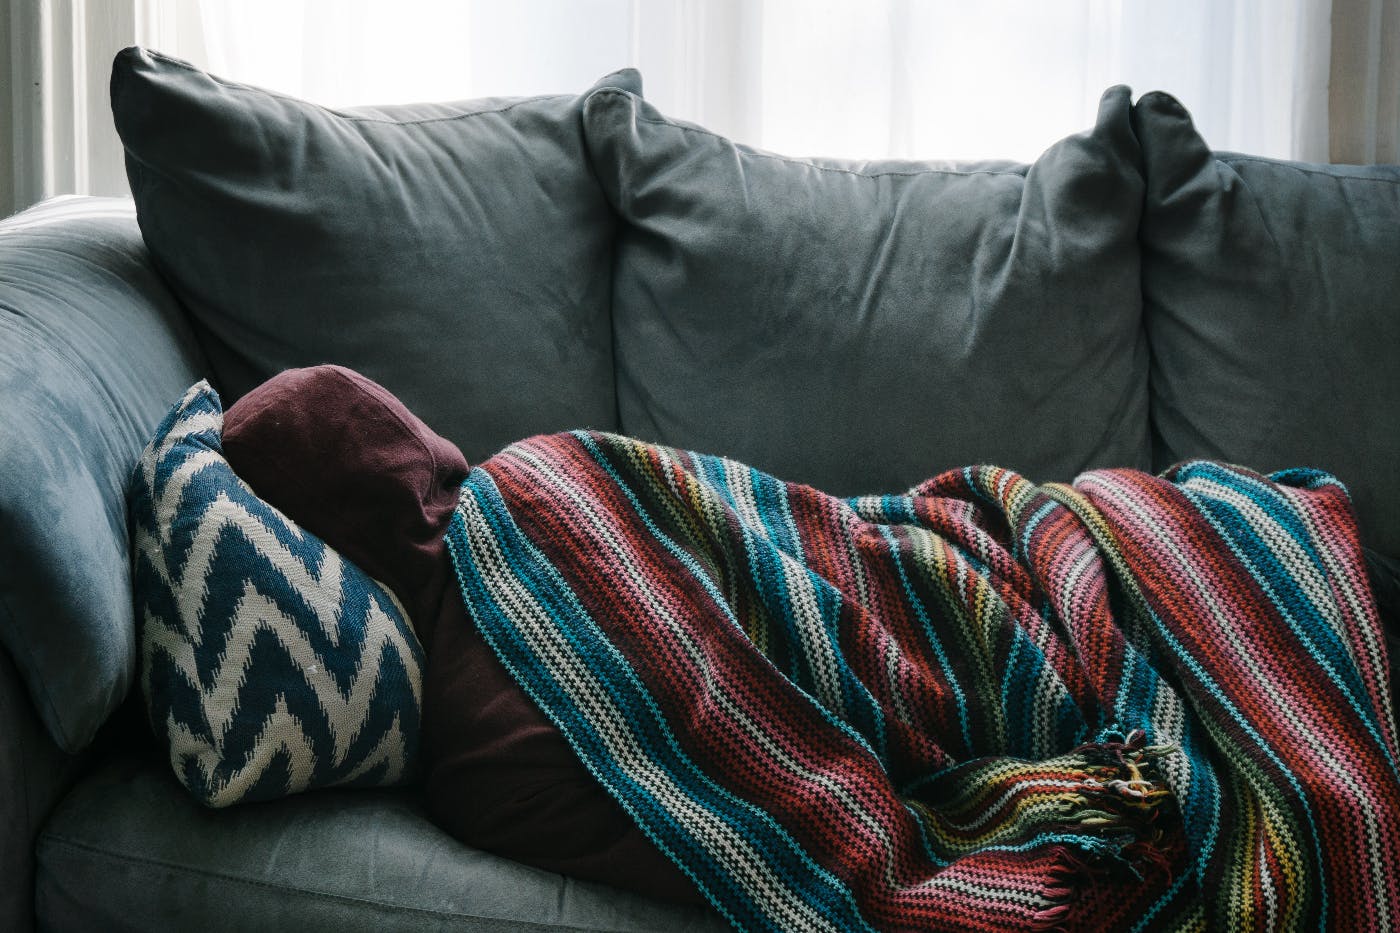 A person wrapped up and cozy on the couch